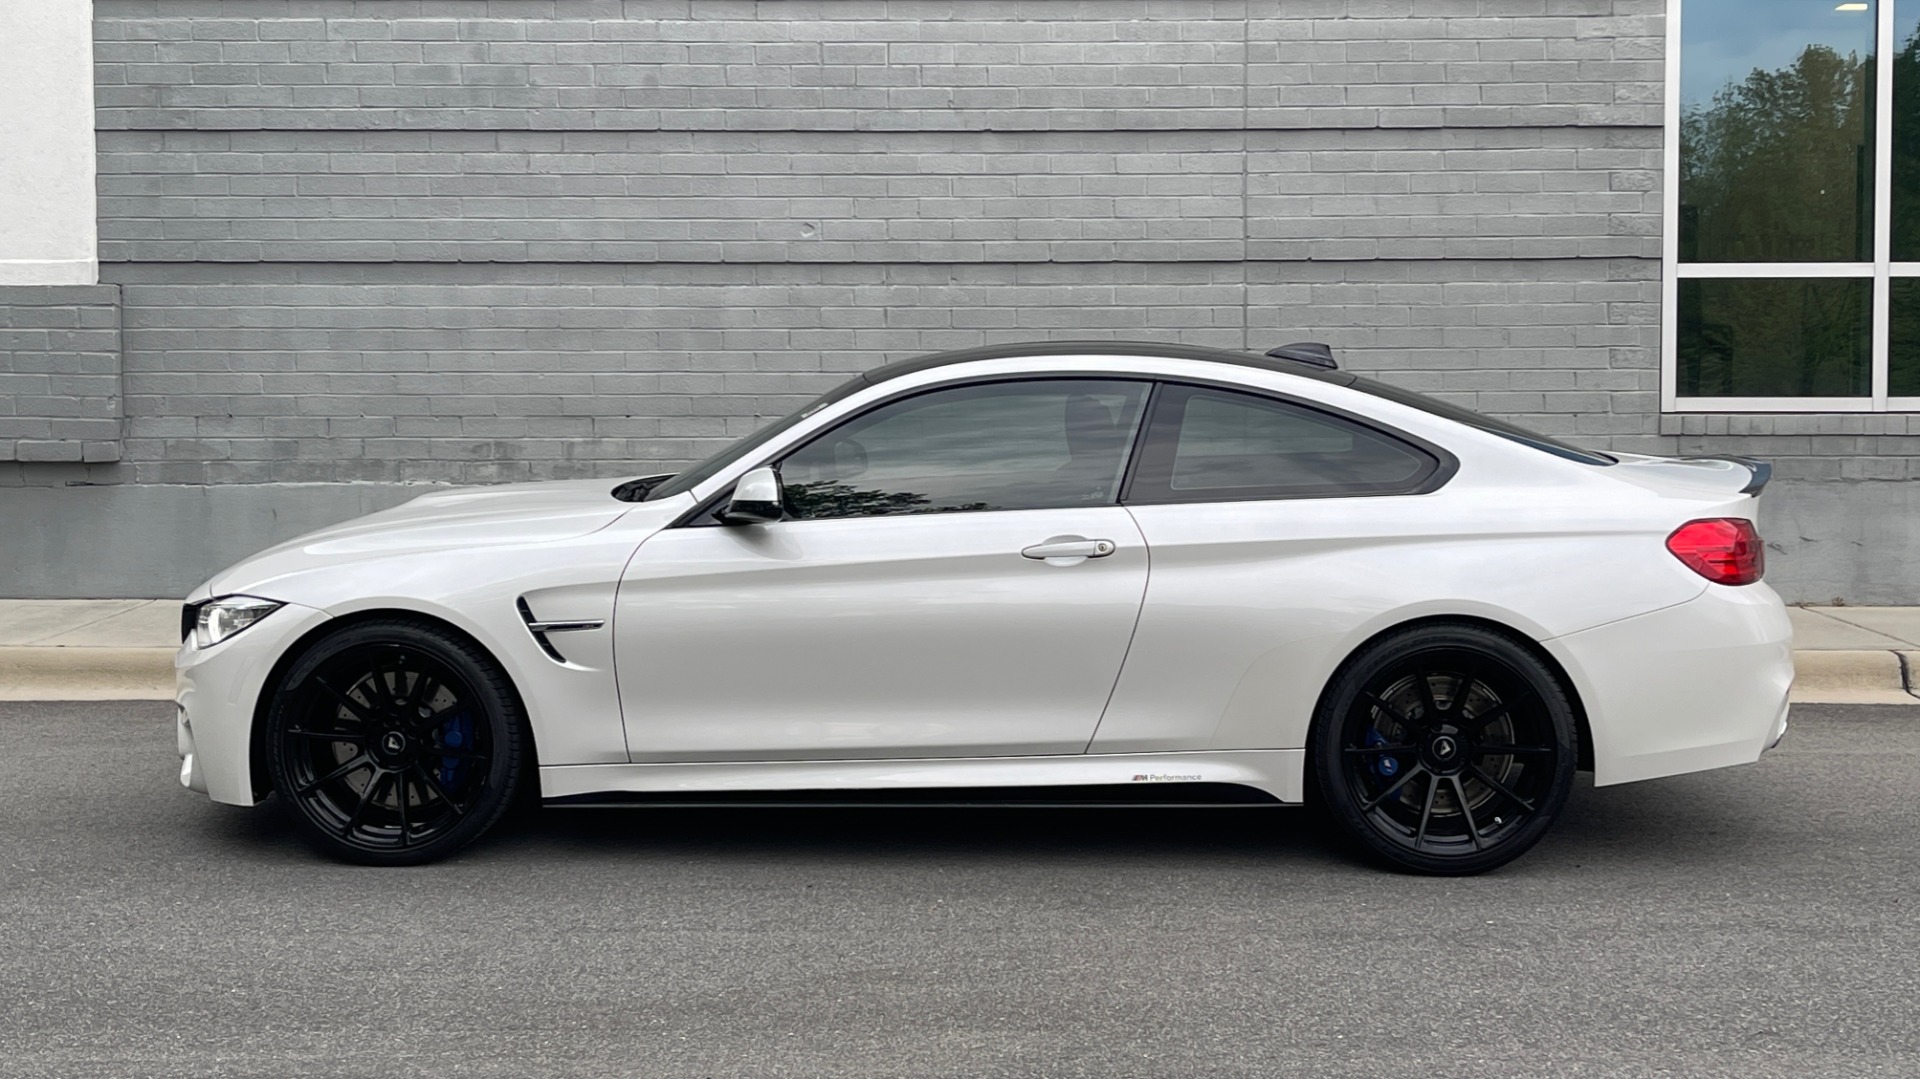 Used 2015 BMW M4 COUPE / 3.0L TURBO 425HP / 7-SPD AUTO / NAV / 19IN WHLS for sale Sold at Formula Imports in Charlotte NC 28227 7